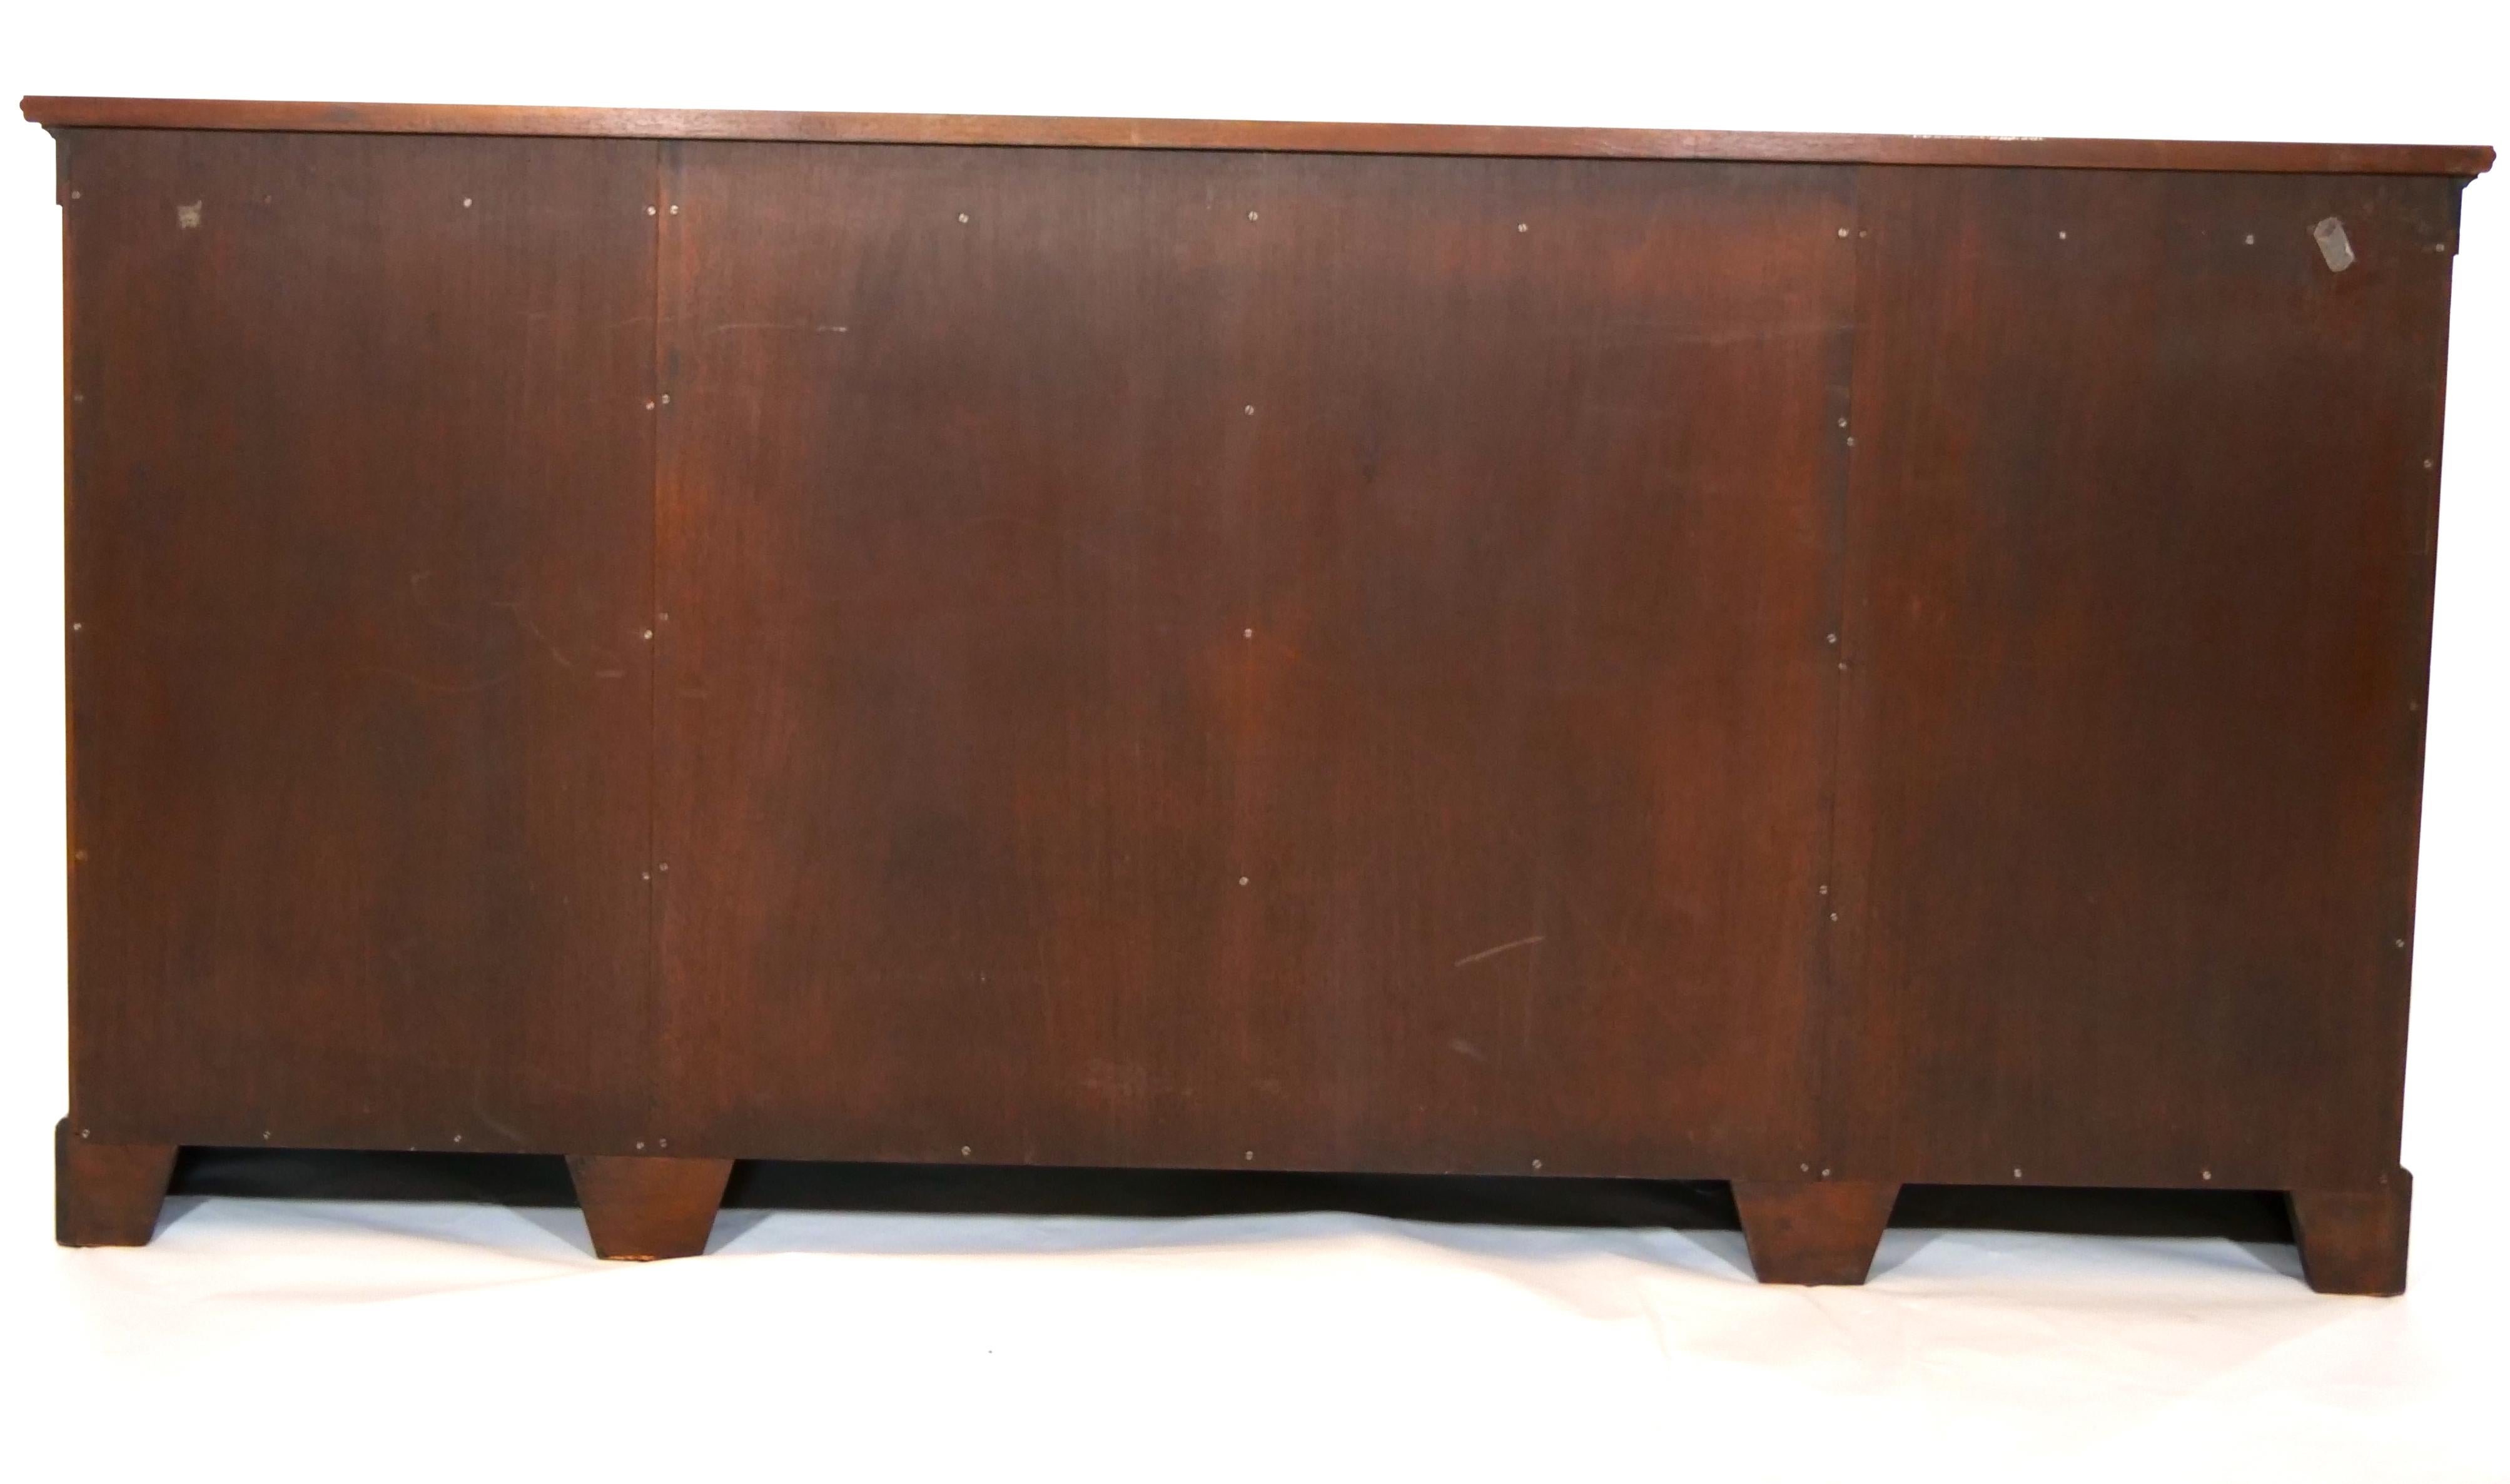 Early 20th Century Mahogany Wood William IV Sideboard / Credenza For Sale